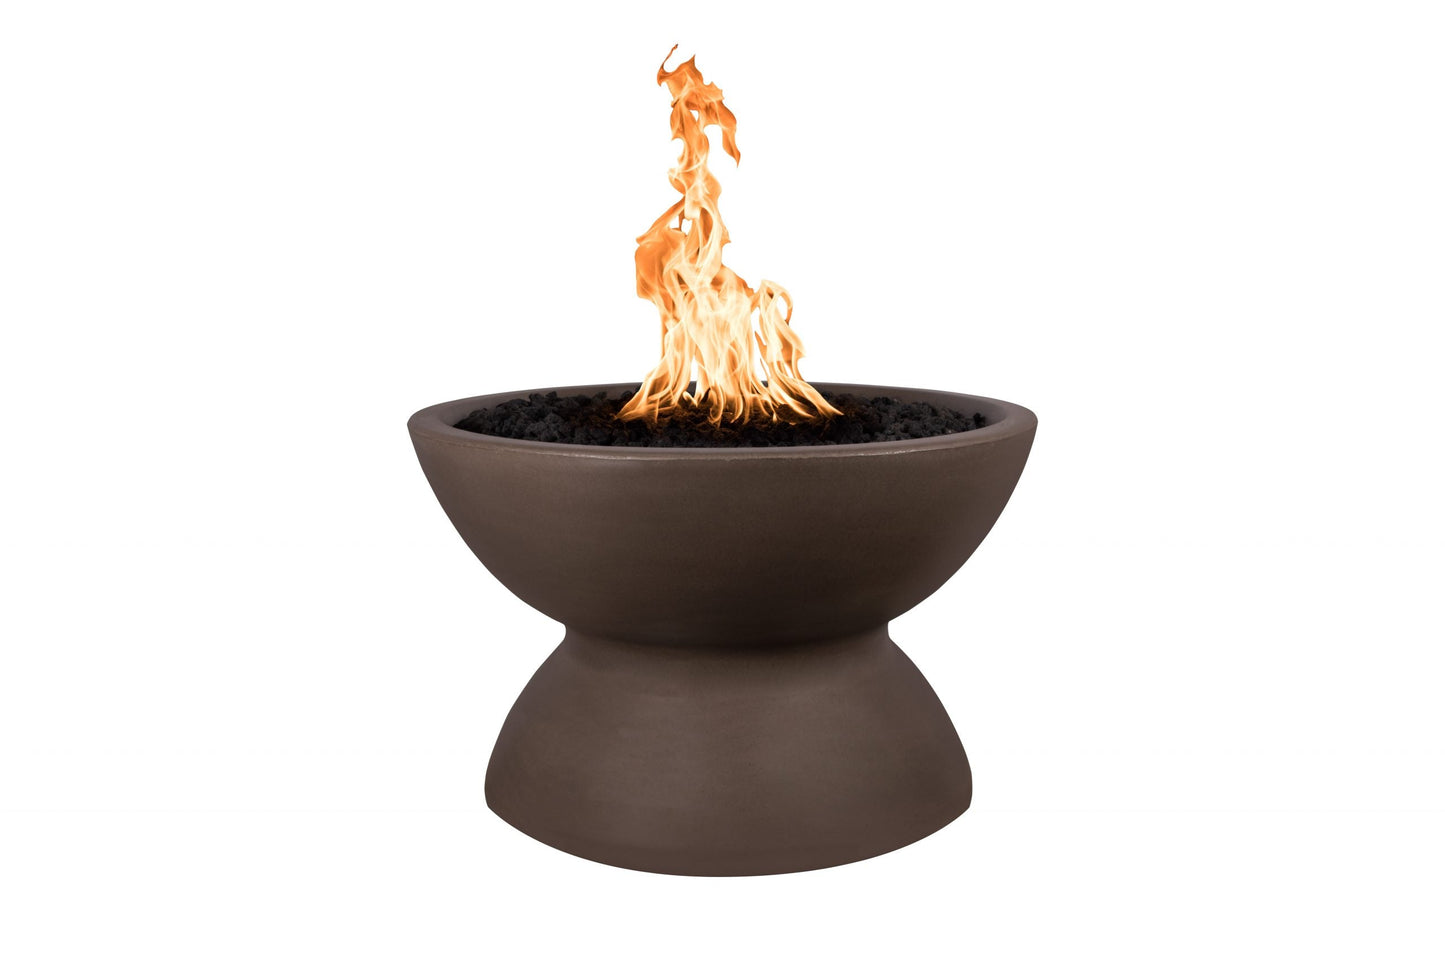 The Outdoor Plus Round Copa 33" Rustic White GFRC Concrete Liquid Propane Fire Pit with 110V Electronic Ignition